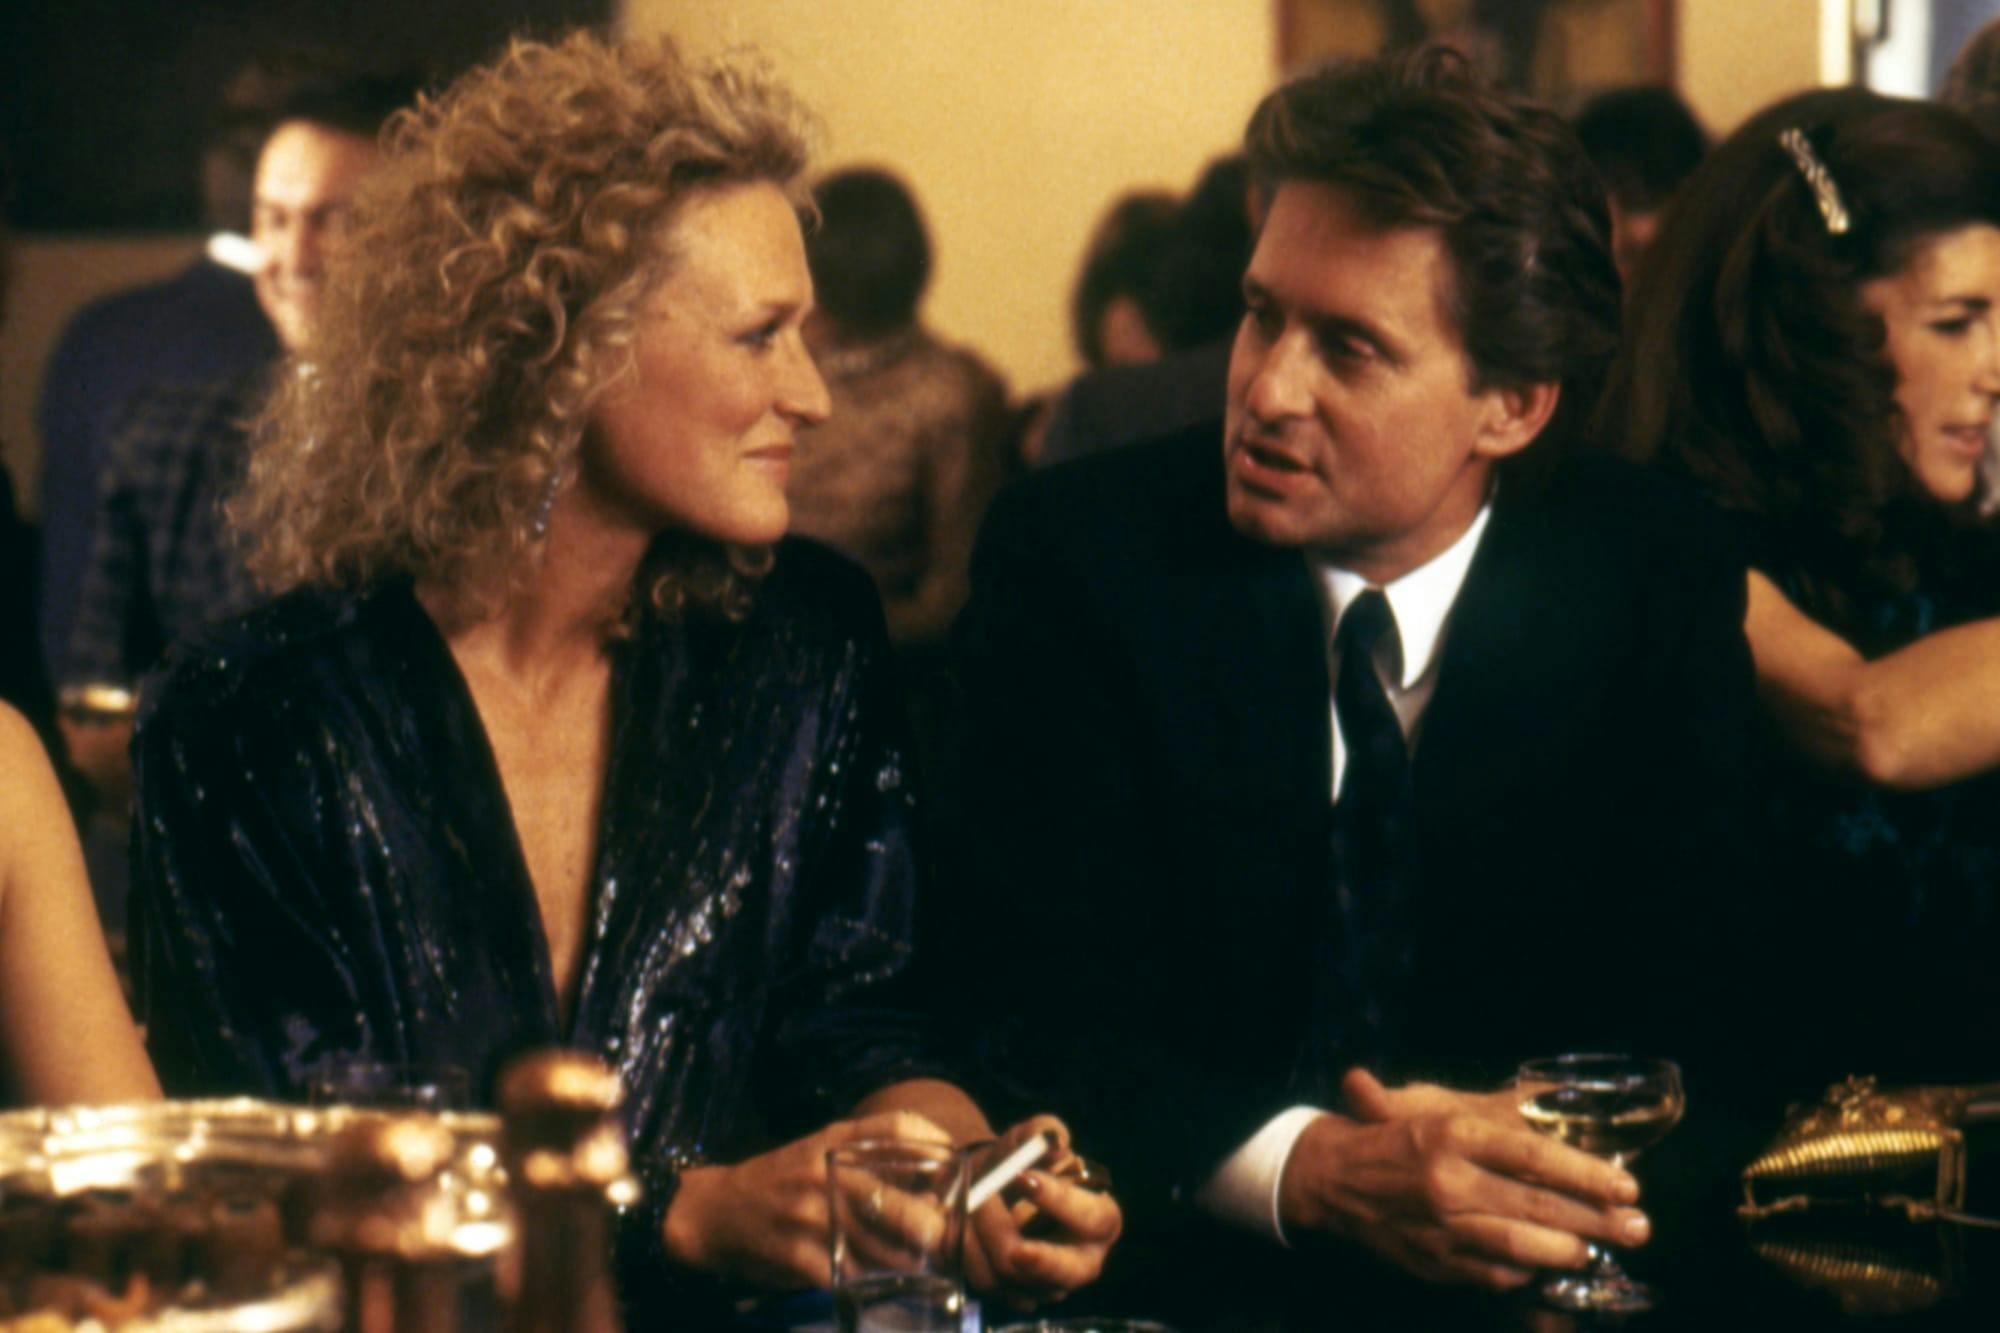 Alex Forrest (Glenn Close) and Dan Gallagher (Michael Douglas) in Fatal Attraction sit at a bar counter together drinking and talking.